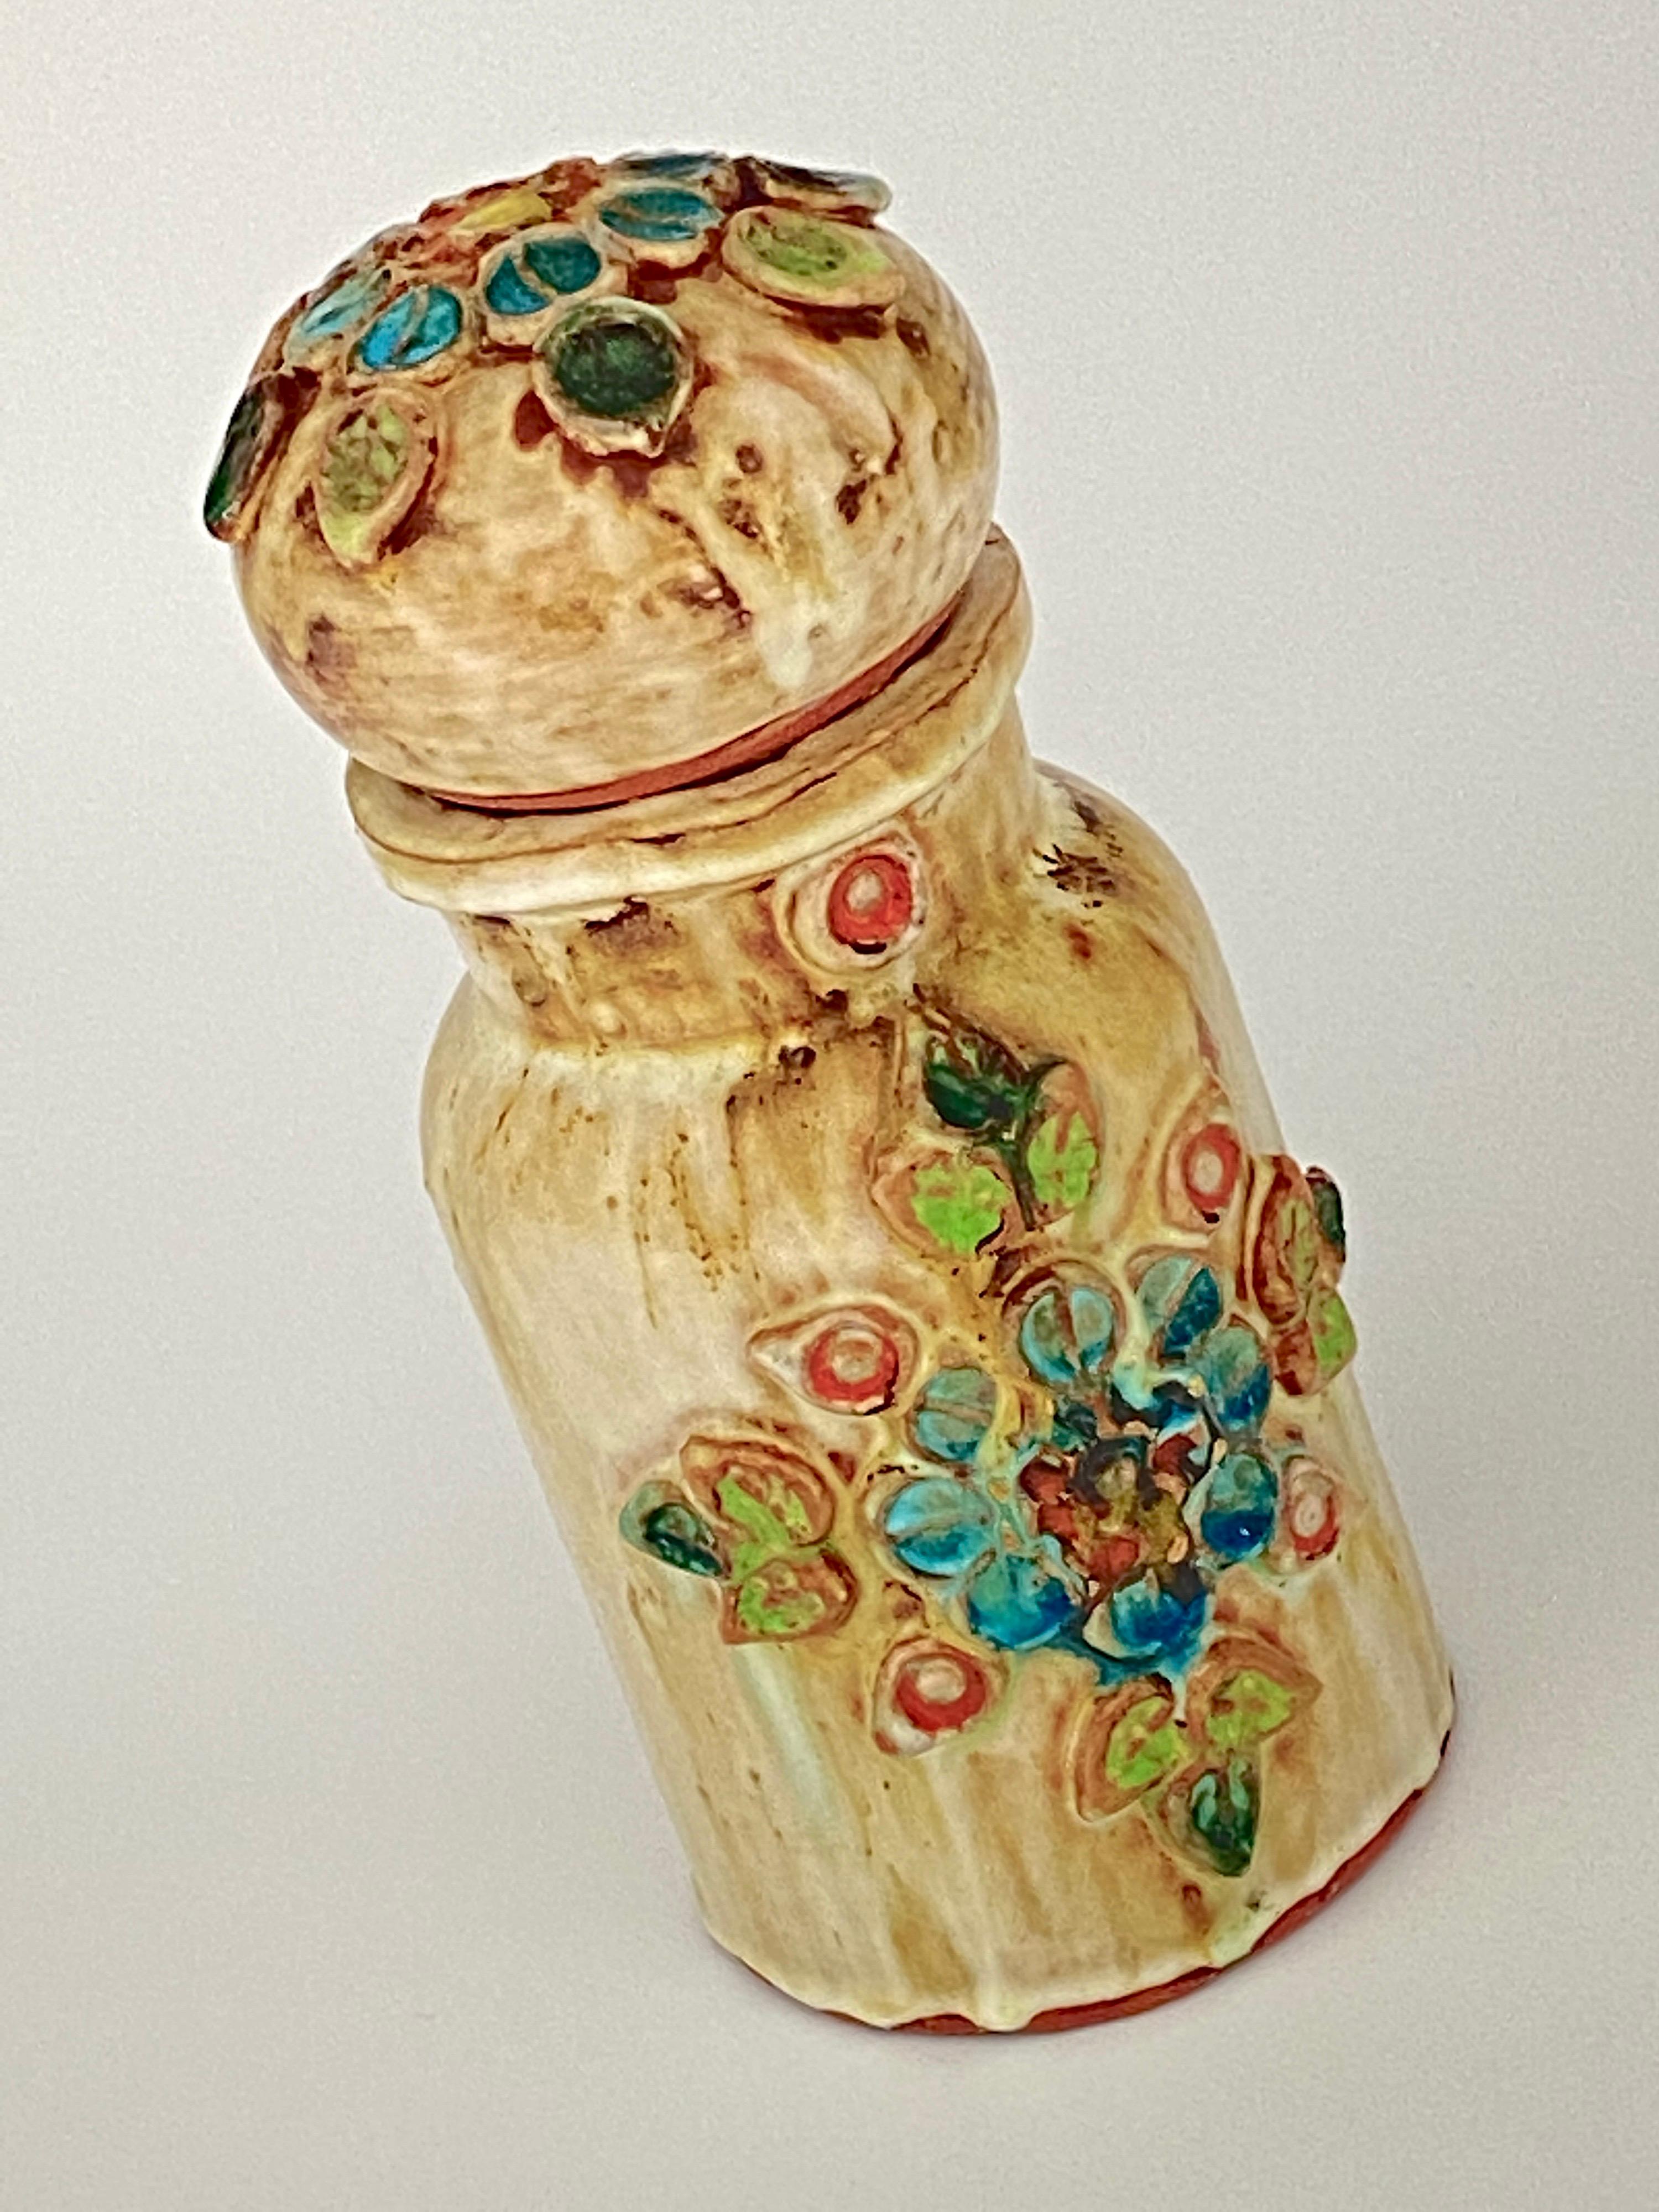 This Ceramic pot is in Ceramic. The decorative Patterns are flowers in ceramic. It has been done in South of France, circa 1970.